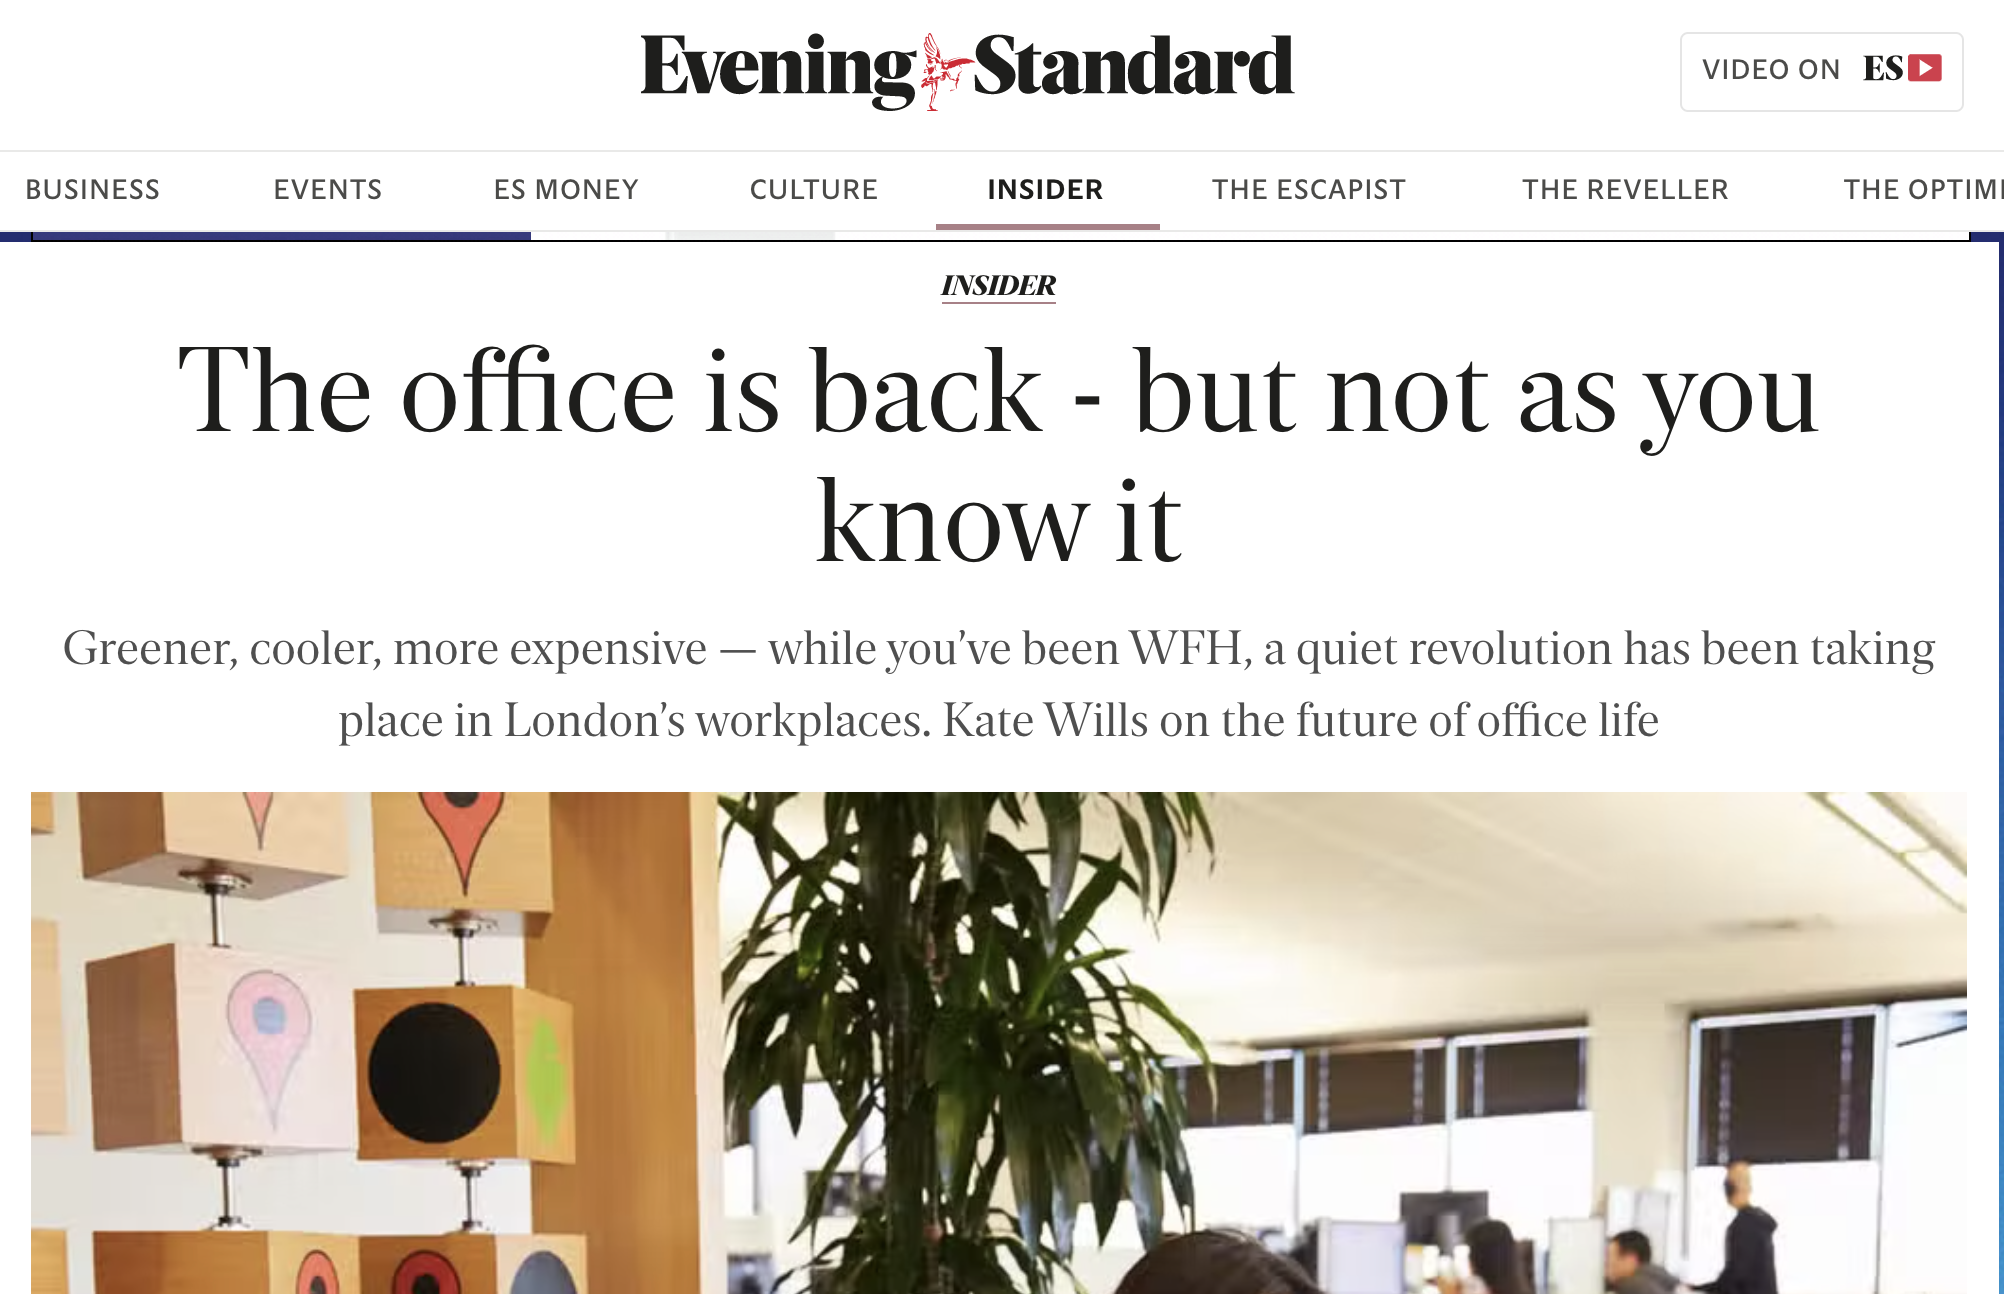 Press: The Office is Back but not as you Know it – The Evening Standard